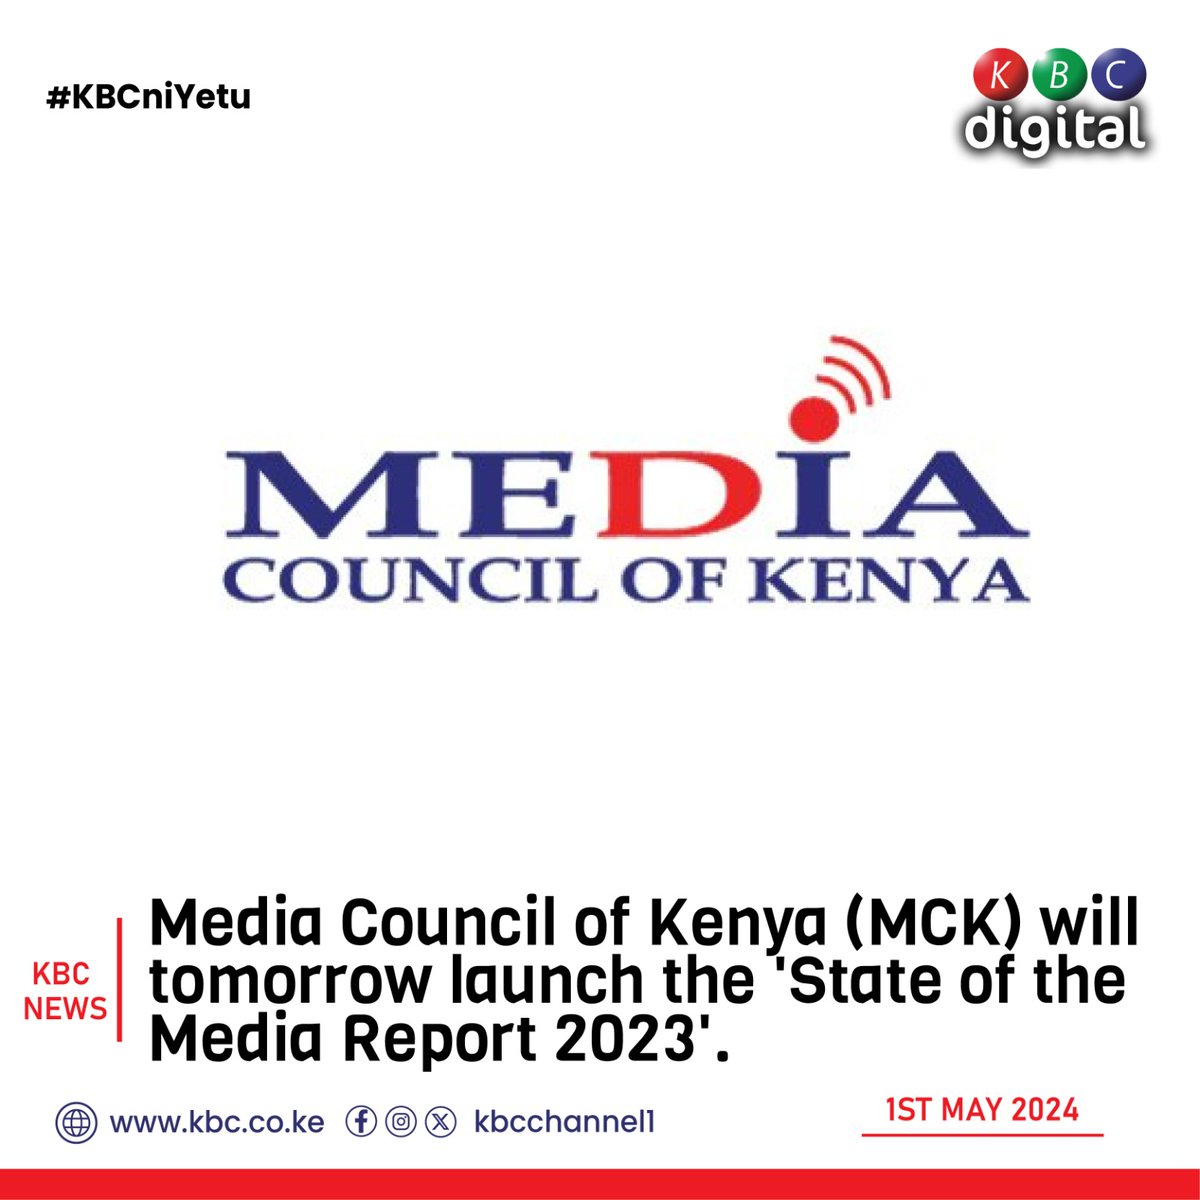 Media Council of Kenya (MCK) will tomorrow launch the 'State of the Media Report 2023'.
#KBCniYetu ^RO